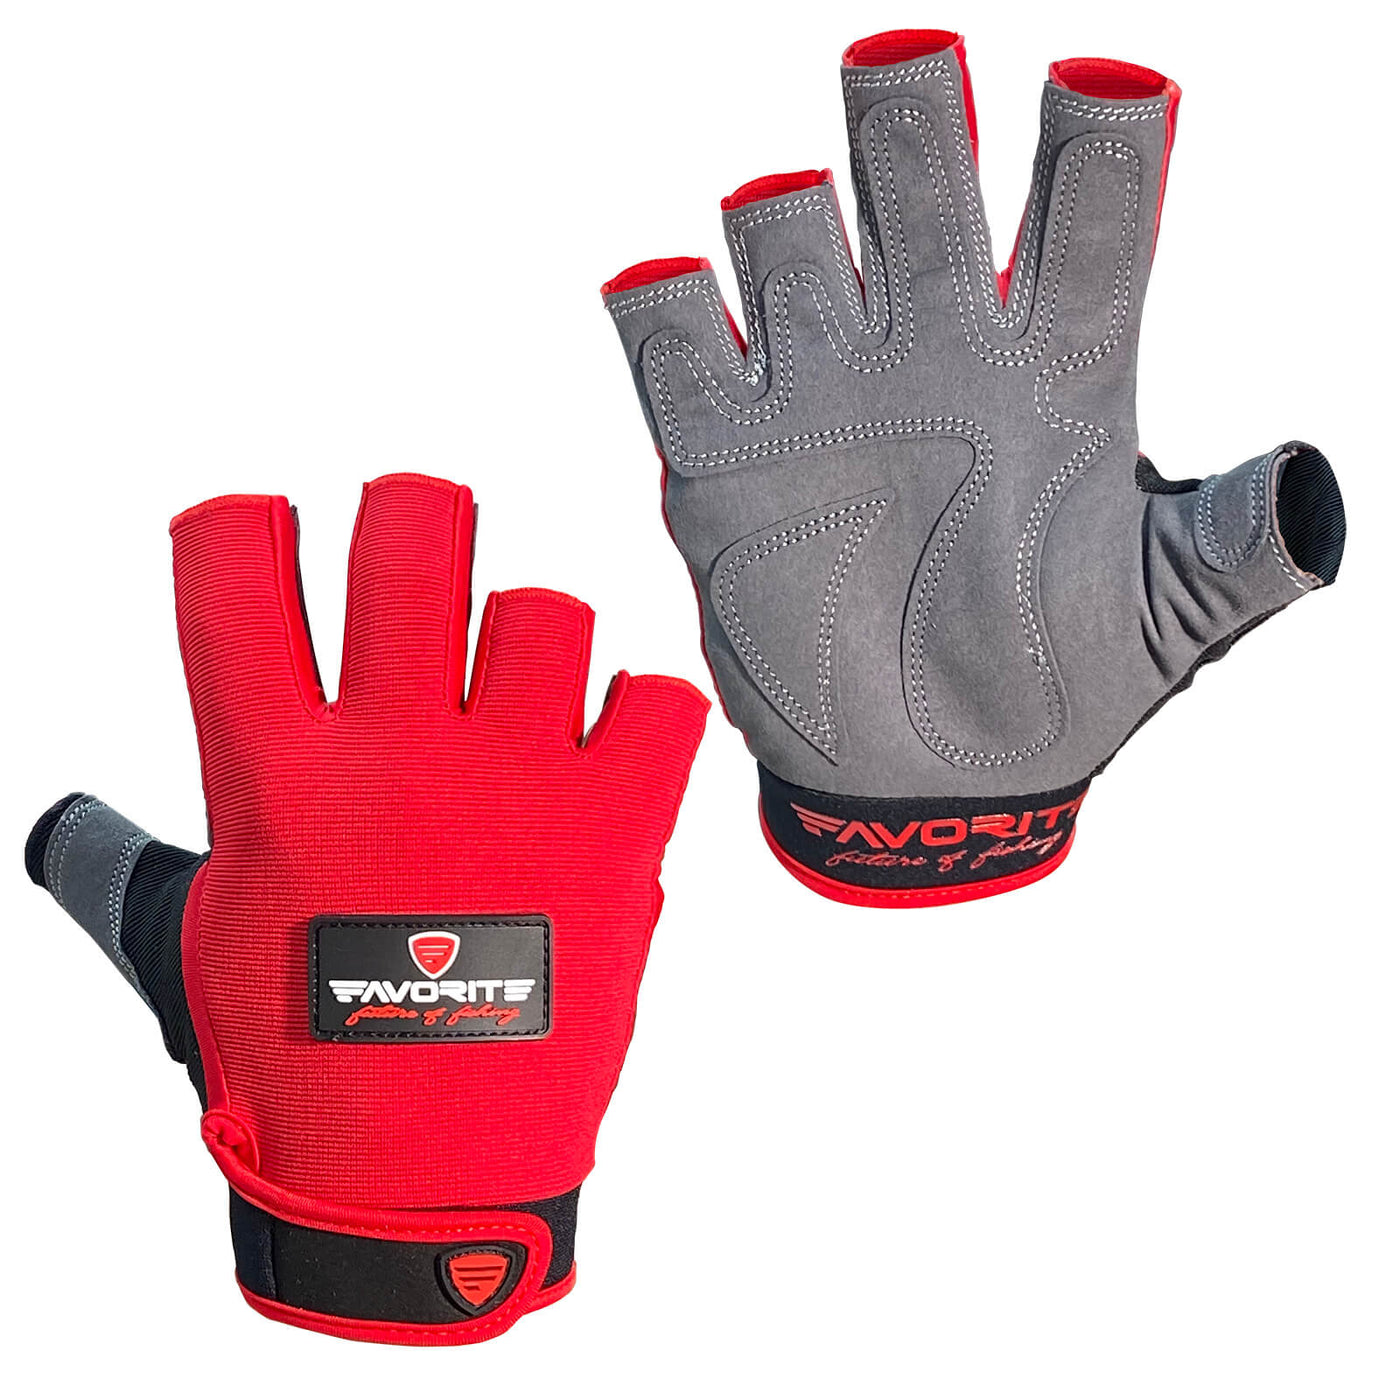 Fishing Gloves | Favorite Fishing Red Patch